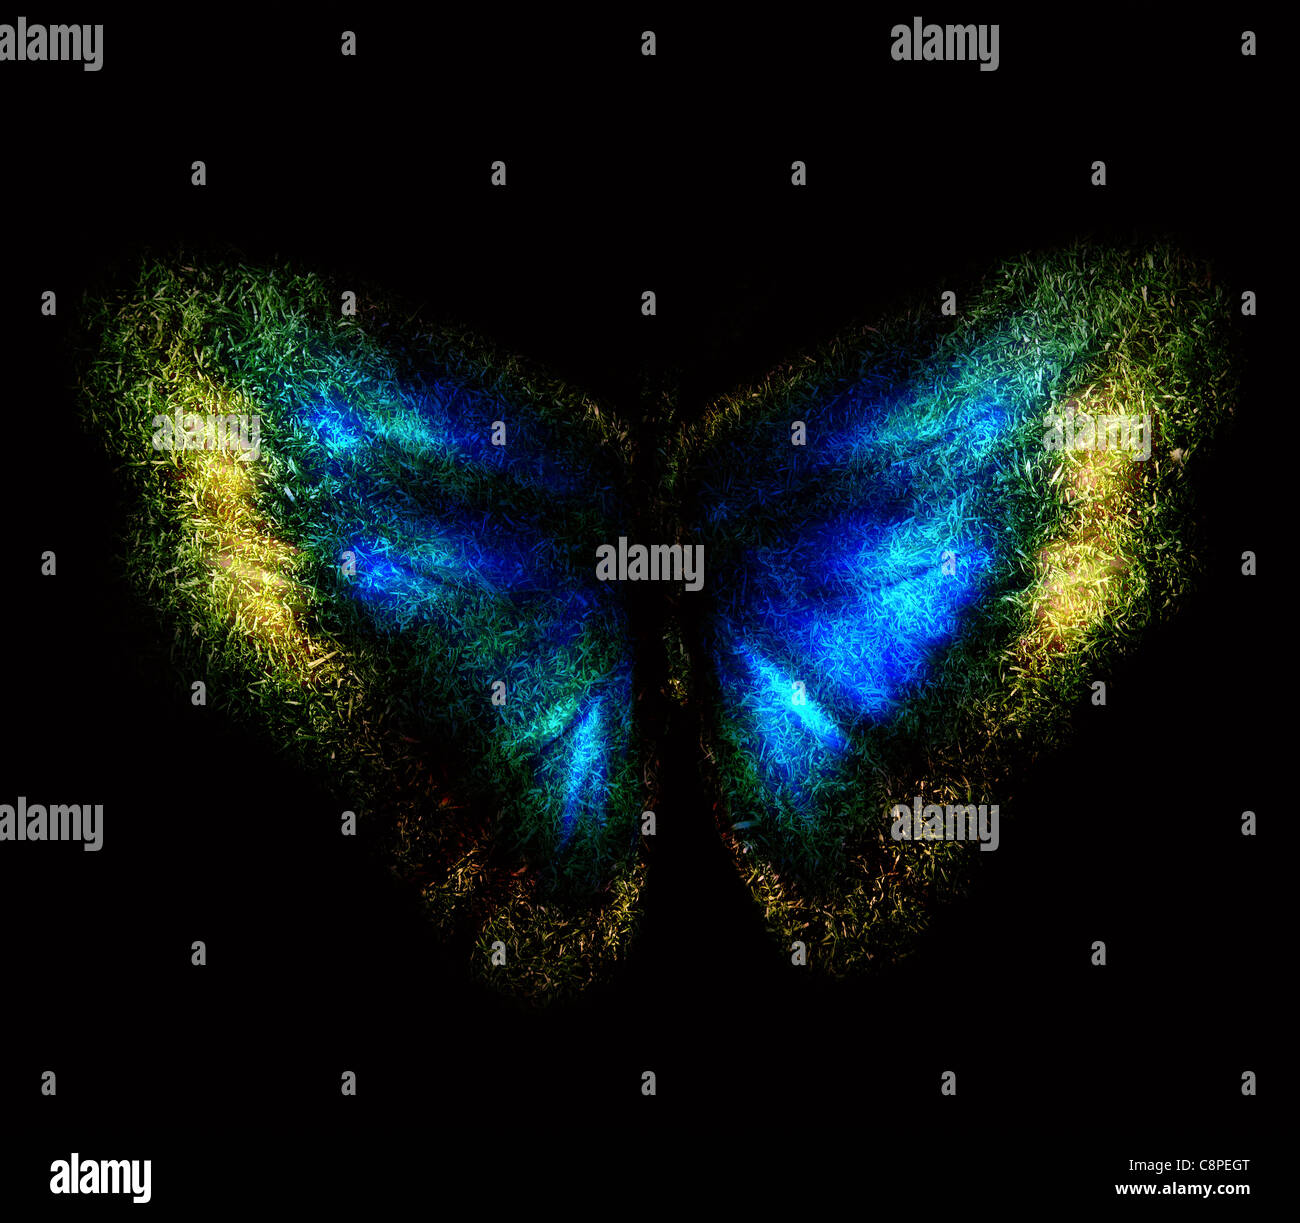 Blue abstract butterfly on a black background Stock Photo